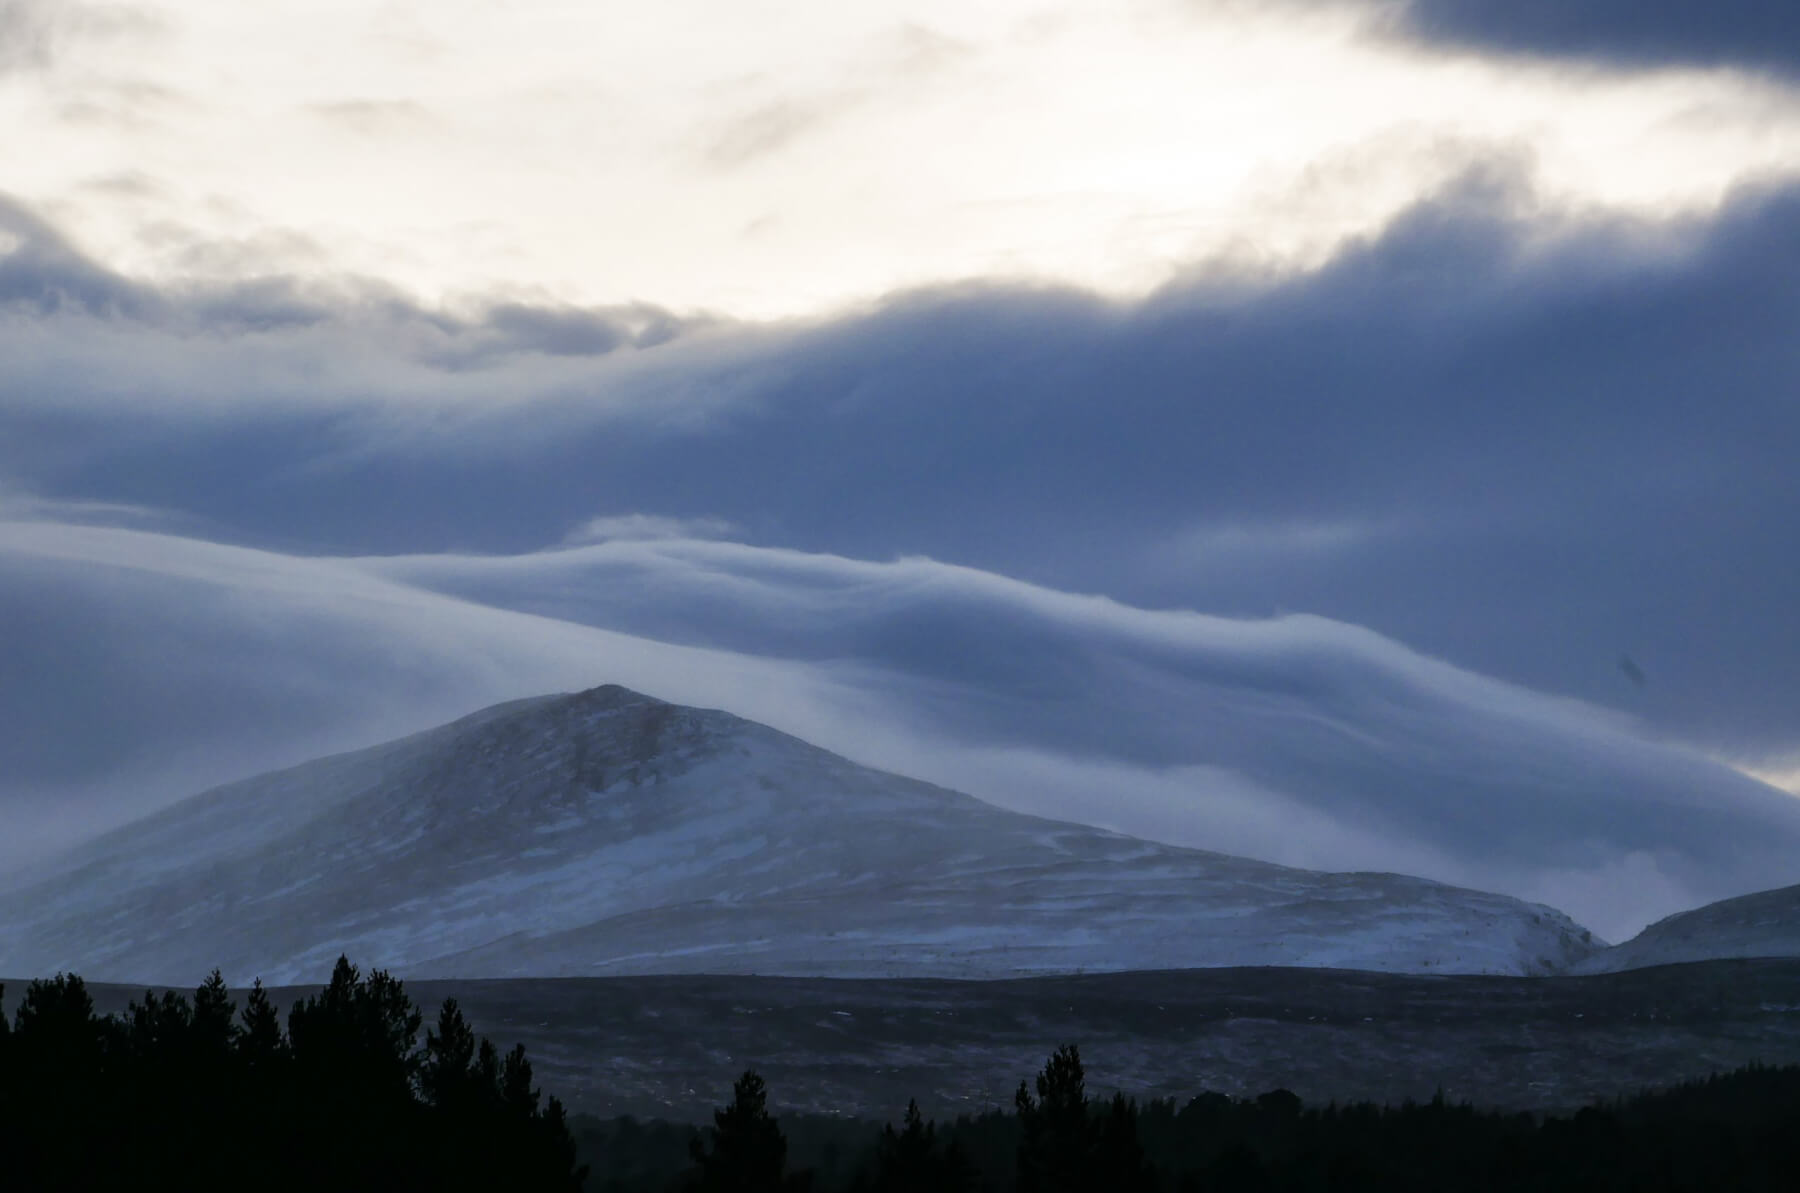 Cloud flowing down over the flanks of Creag Leith-choin. The Chalamain Gap visible on the far right of the image.